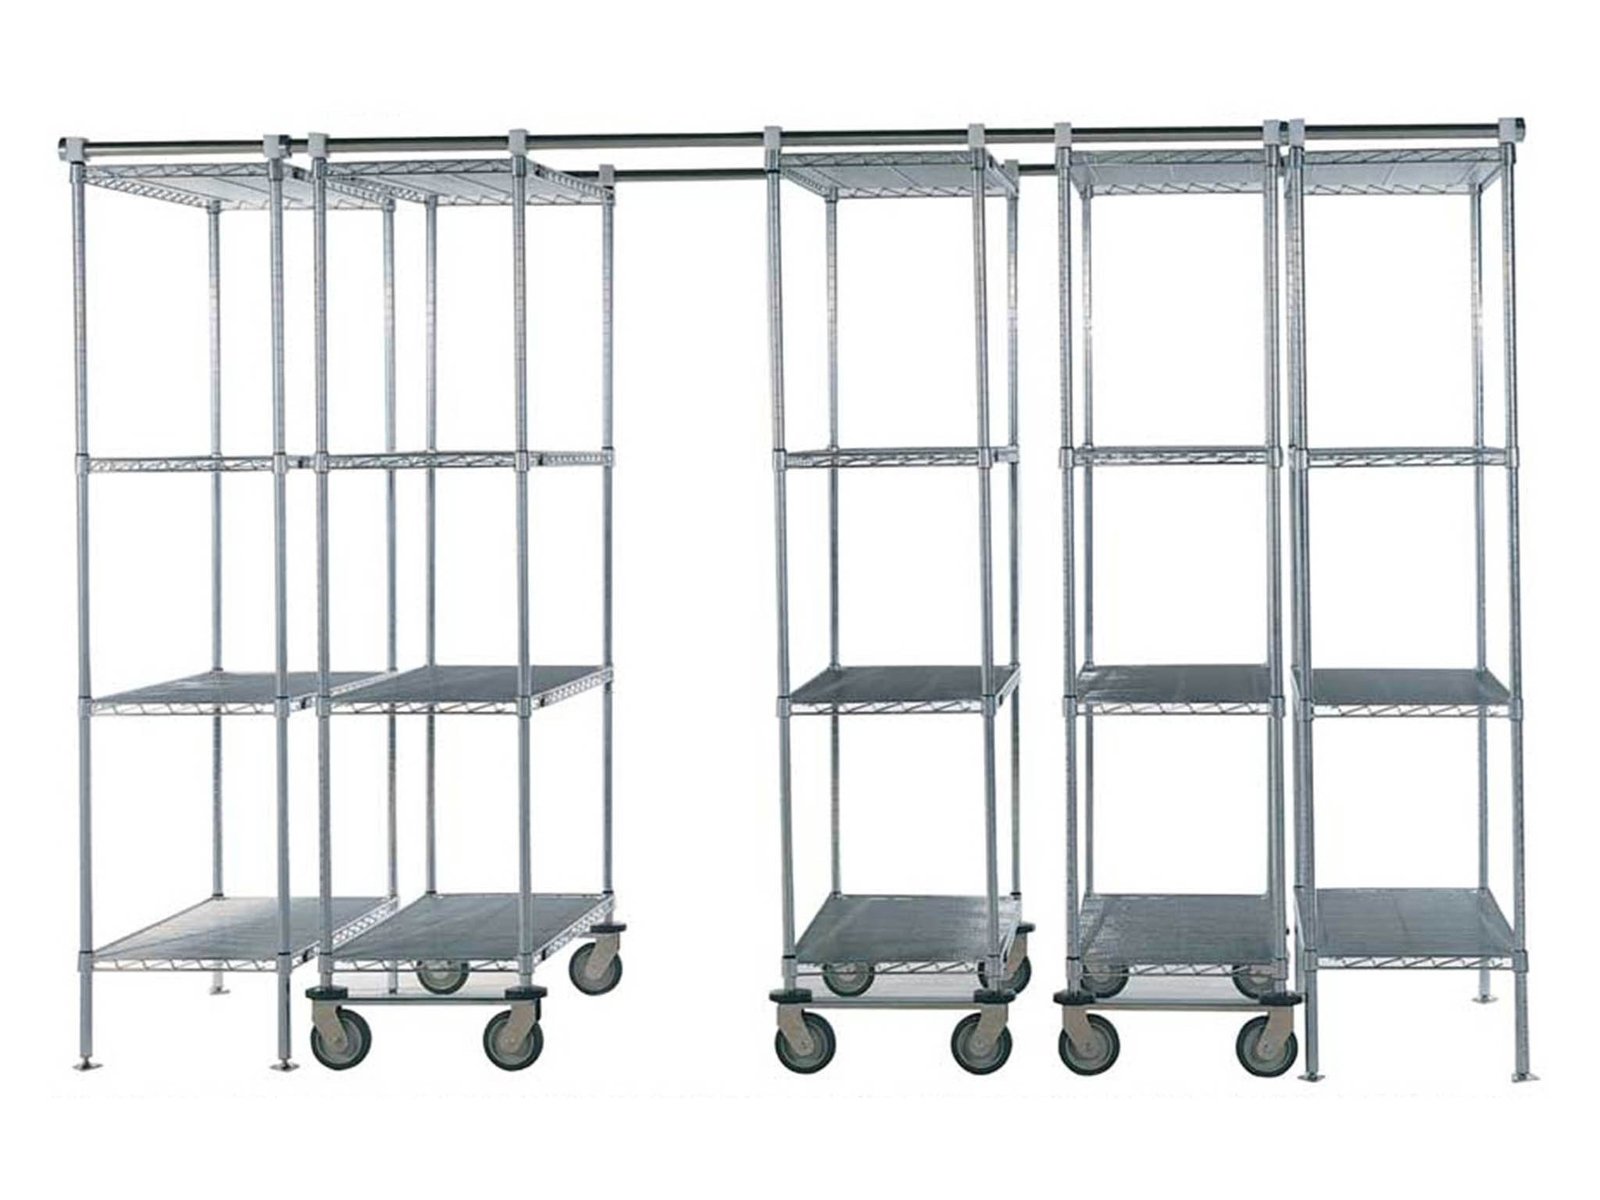 You are currently viewing Factors That Make Modern Business Resort To Mobile Shelving